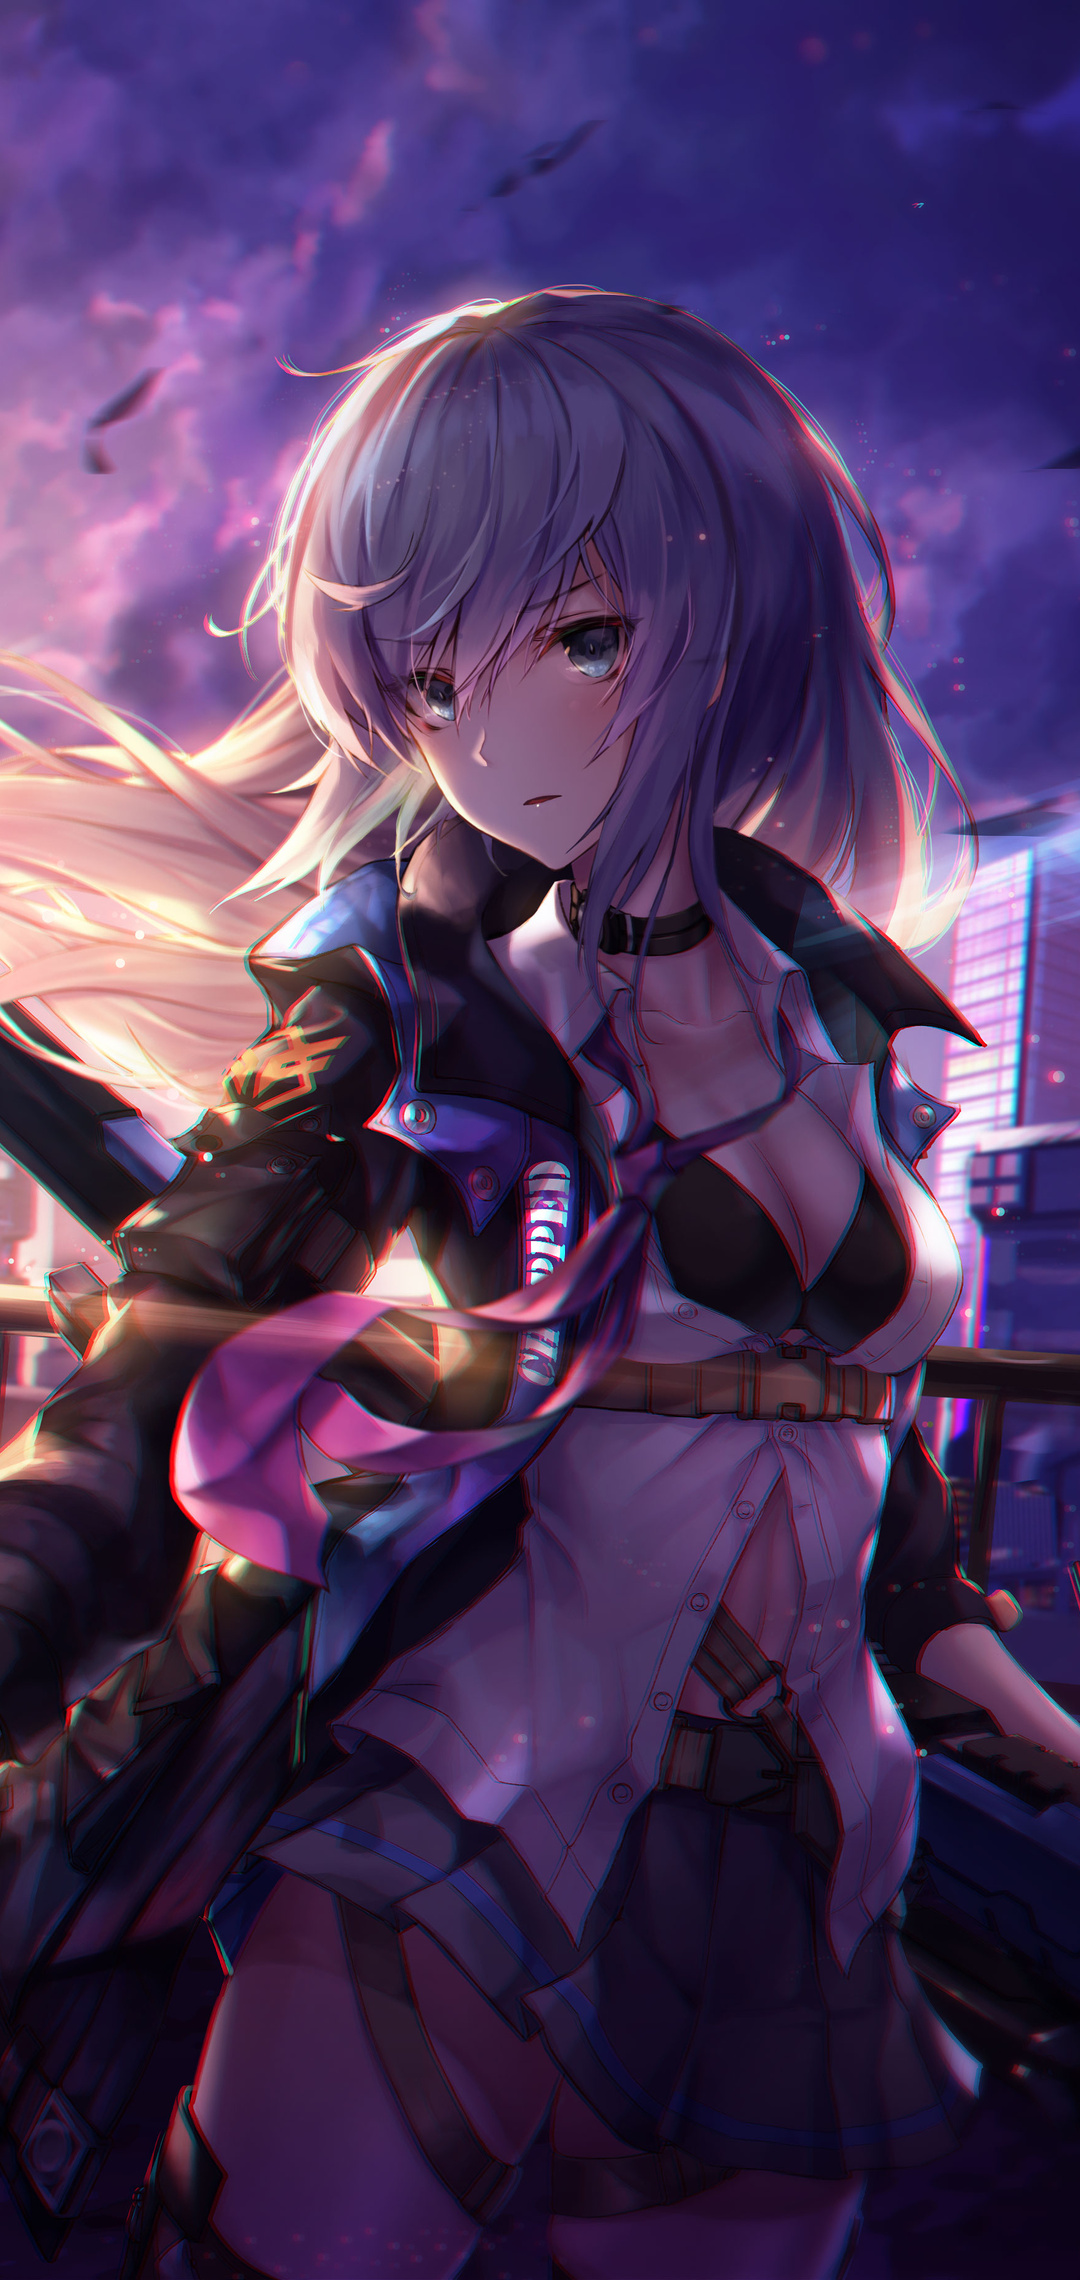 1080x2280 Anime Warrior Girl With Sword 5k One Plus 6,Huawei p20,Honor view 10,Vivo y85,Oppo f7 ...